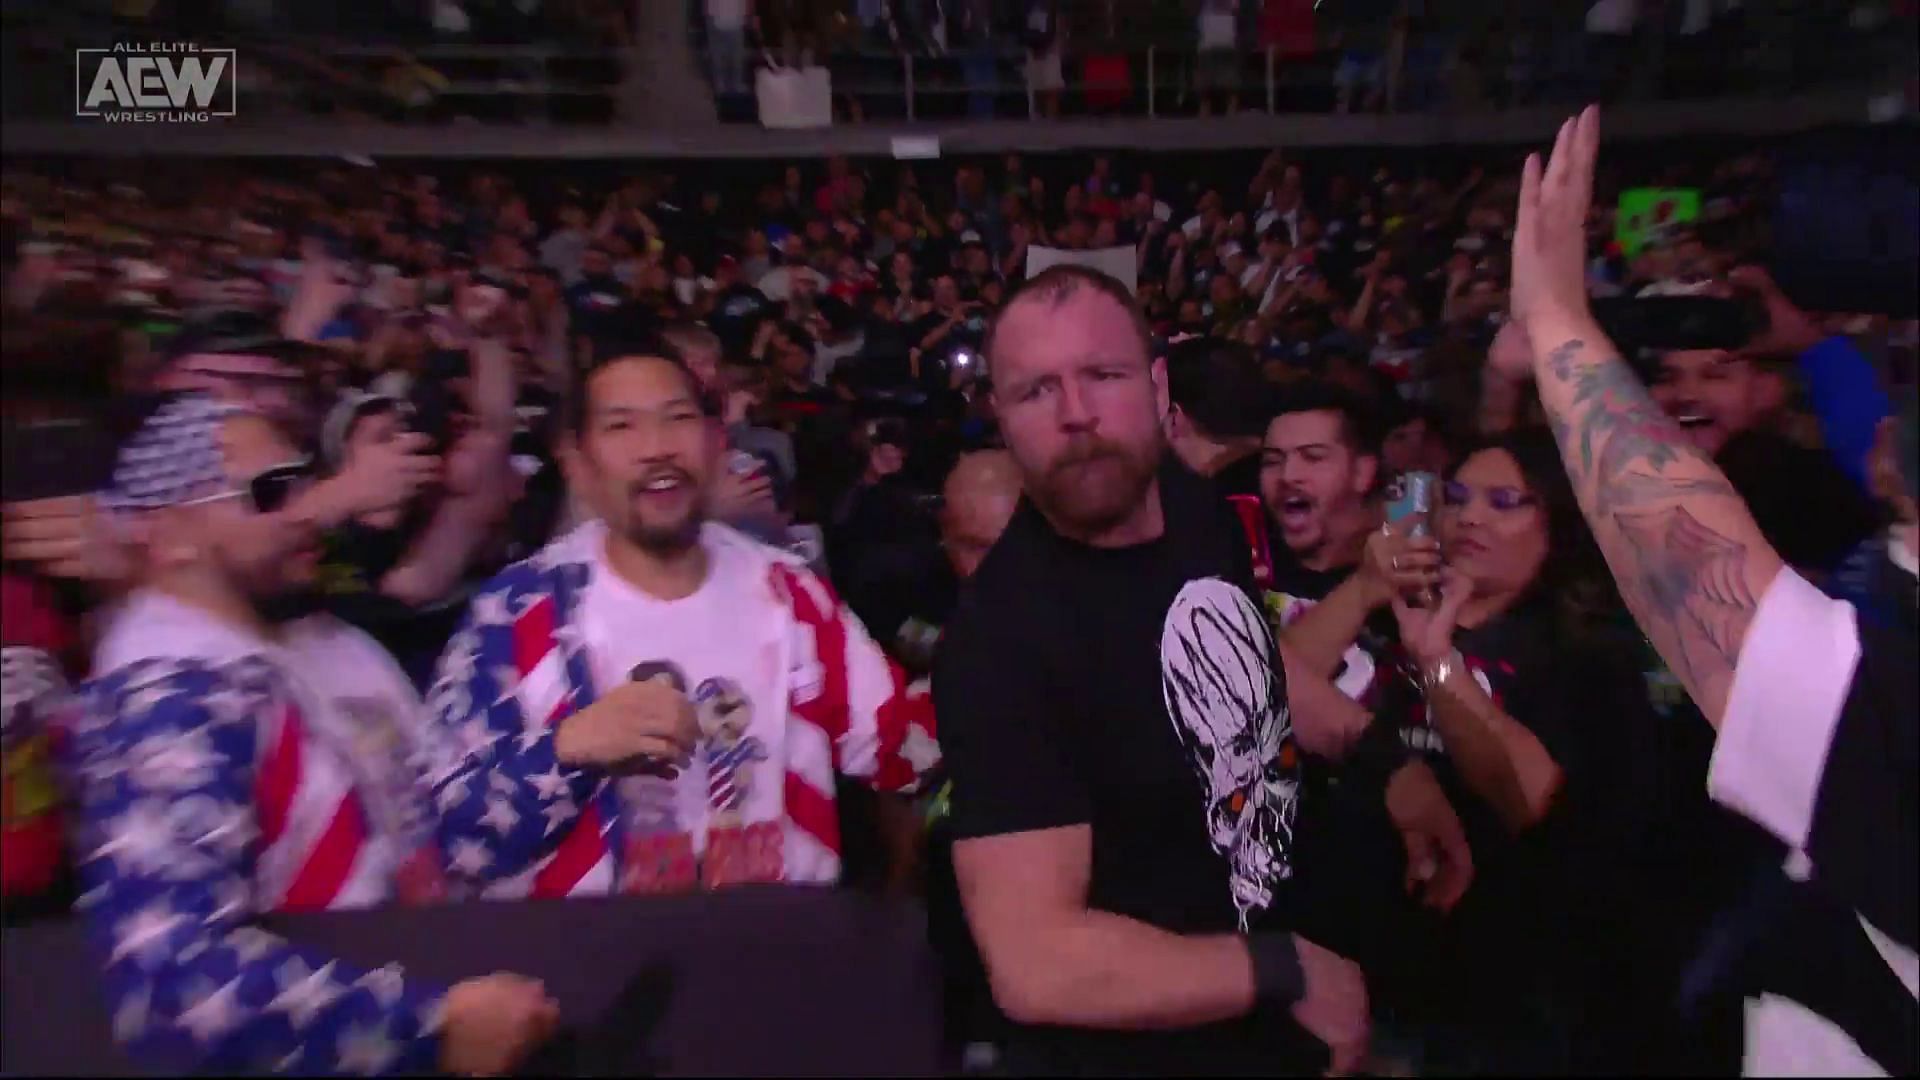 Moxley moving through the crowd during his entrance on Dynamite.